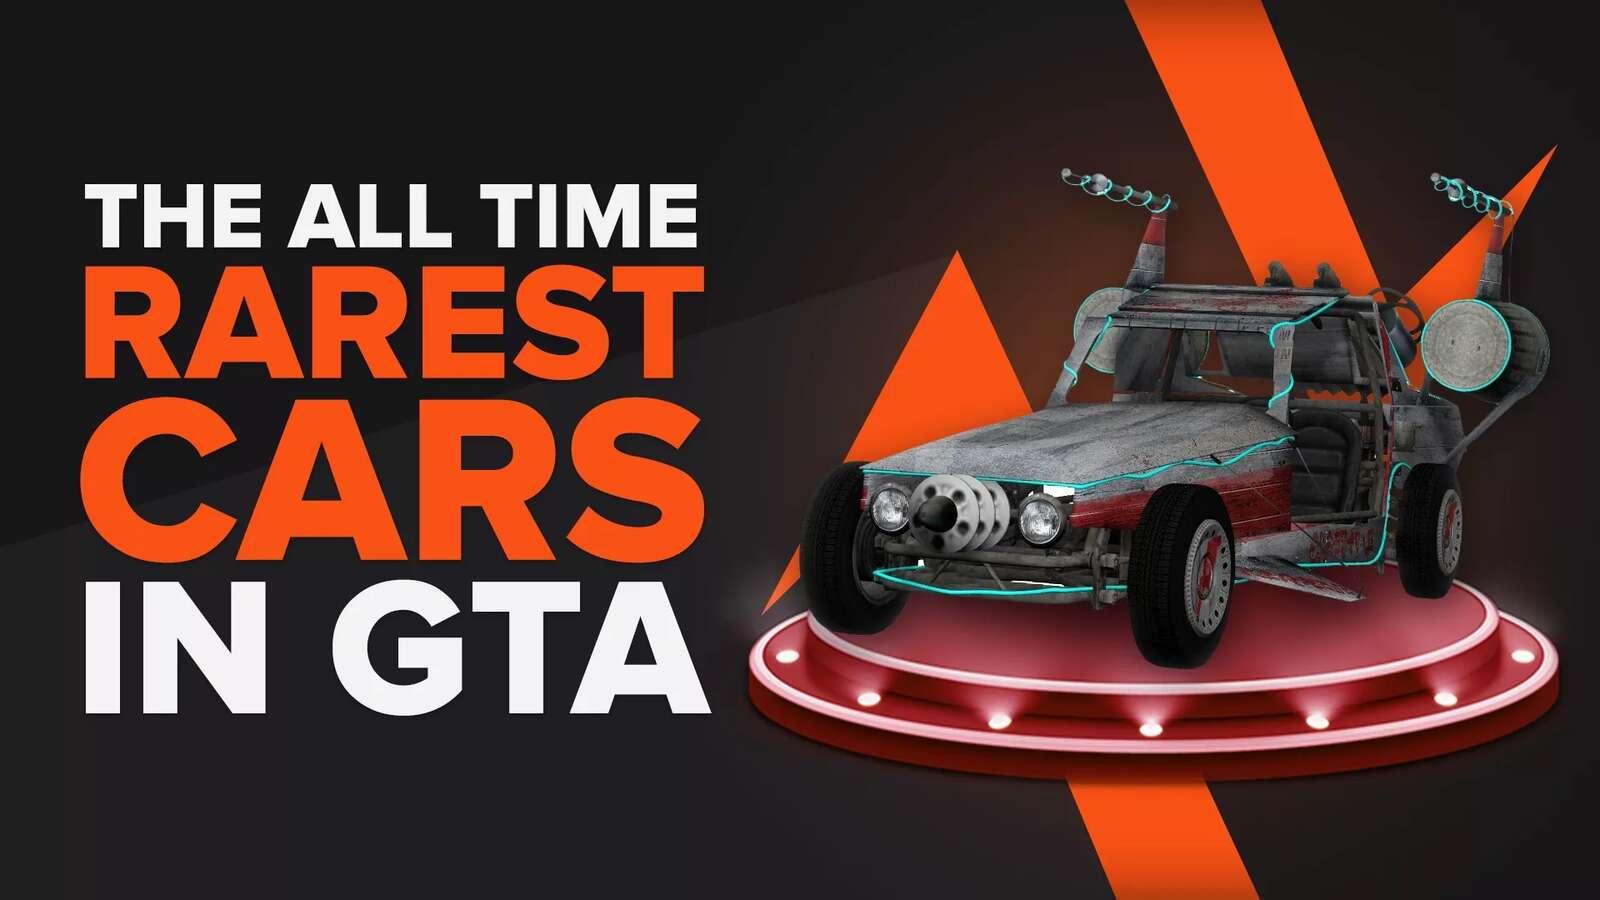 Rarest Cars of All Time in GTA [Top 10 List]